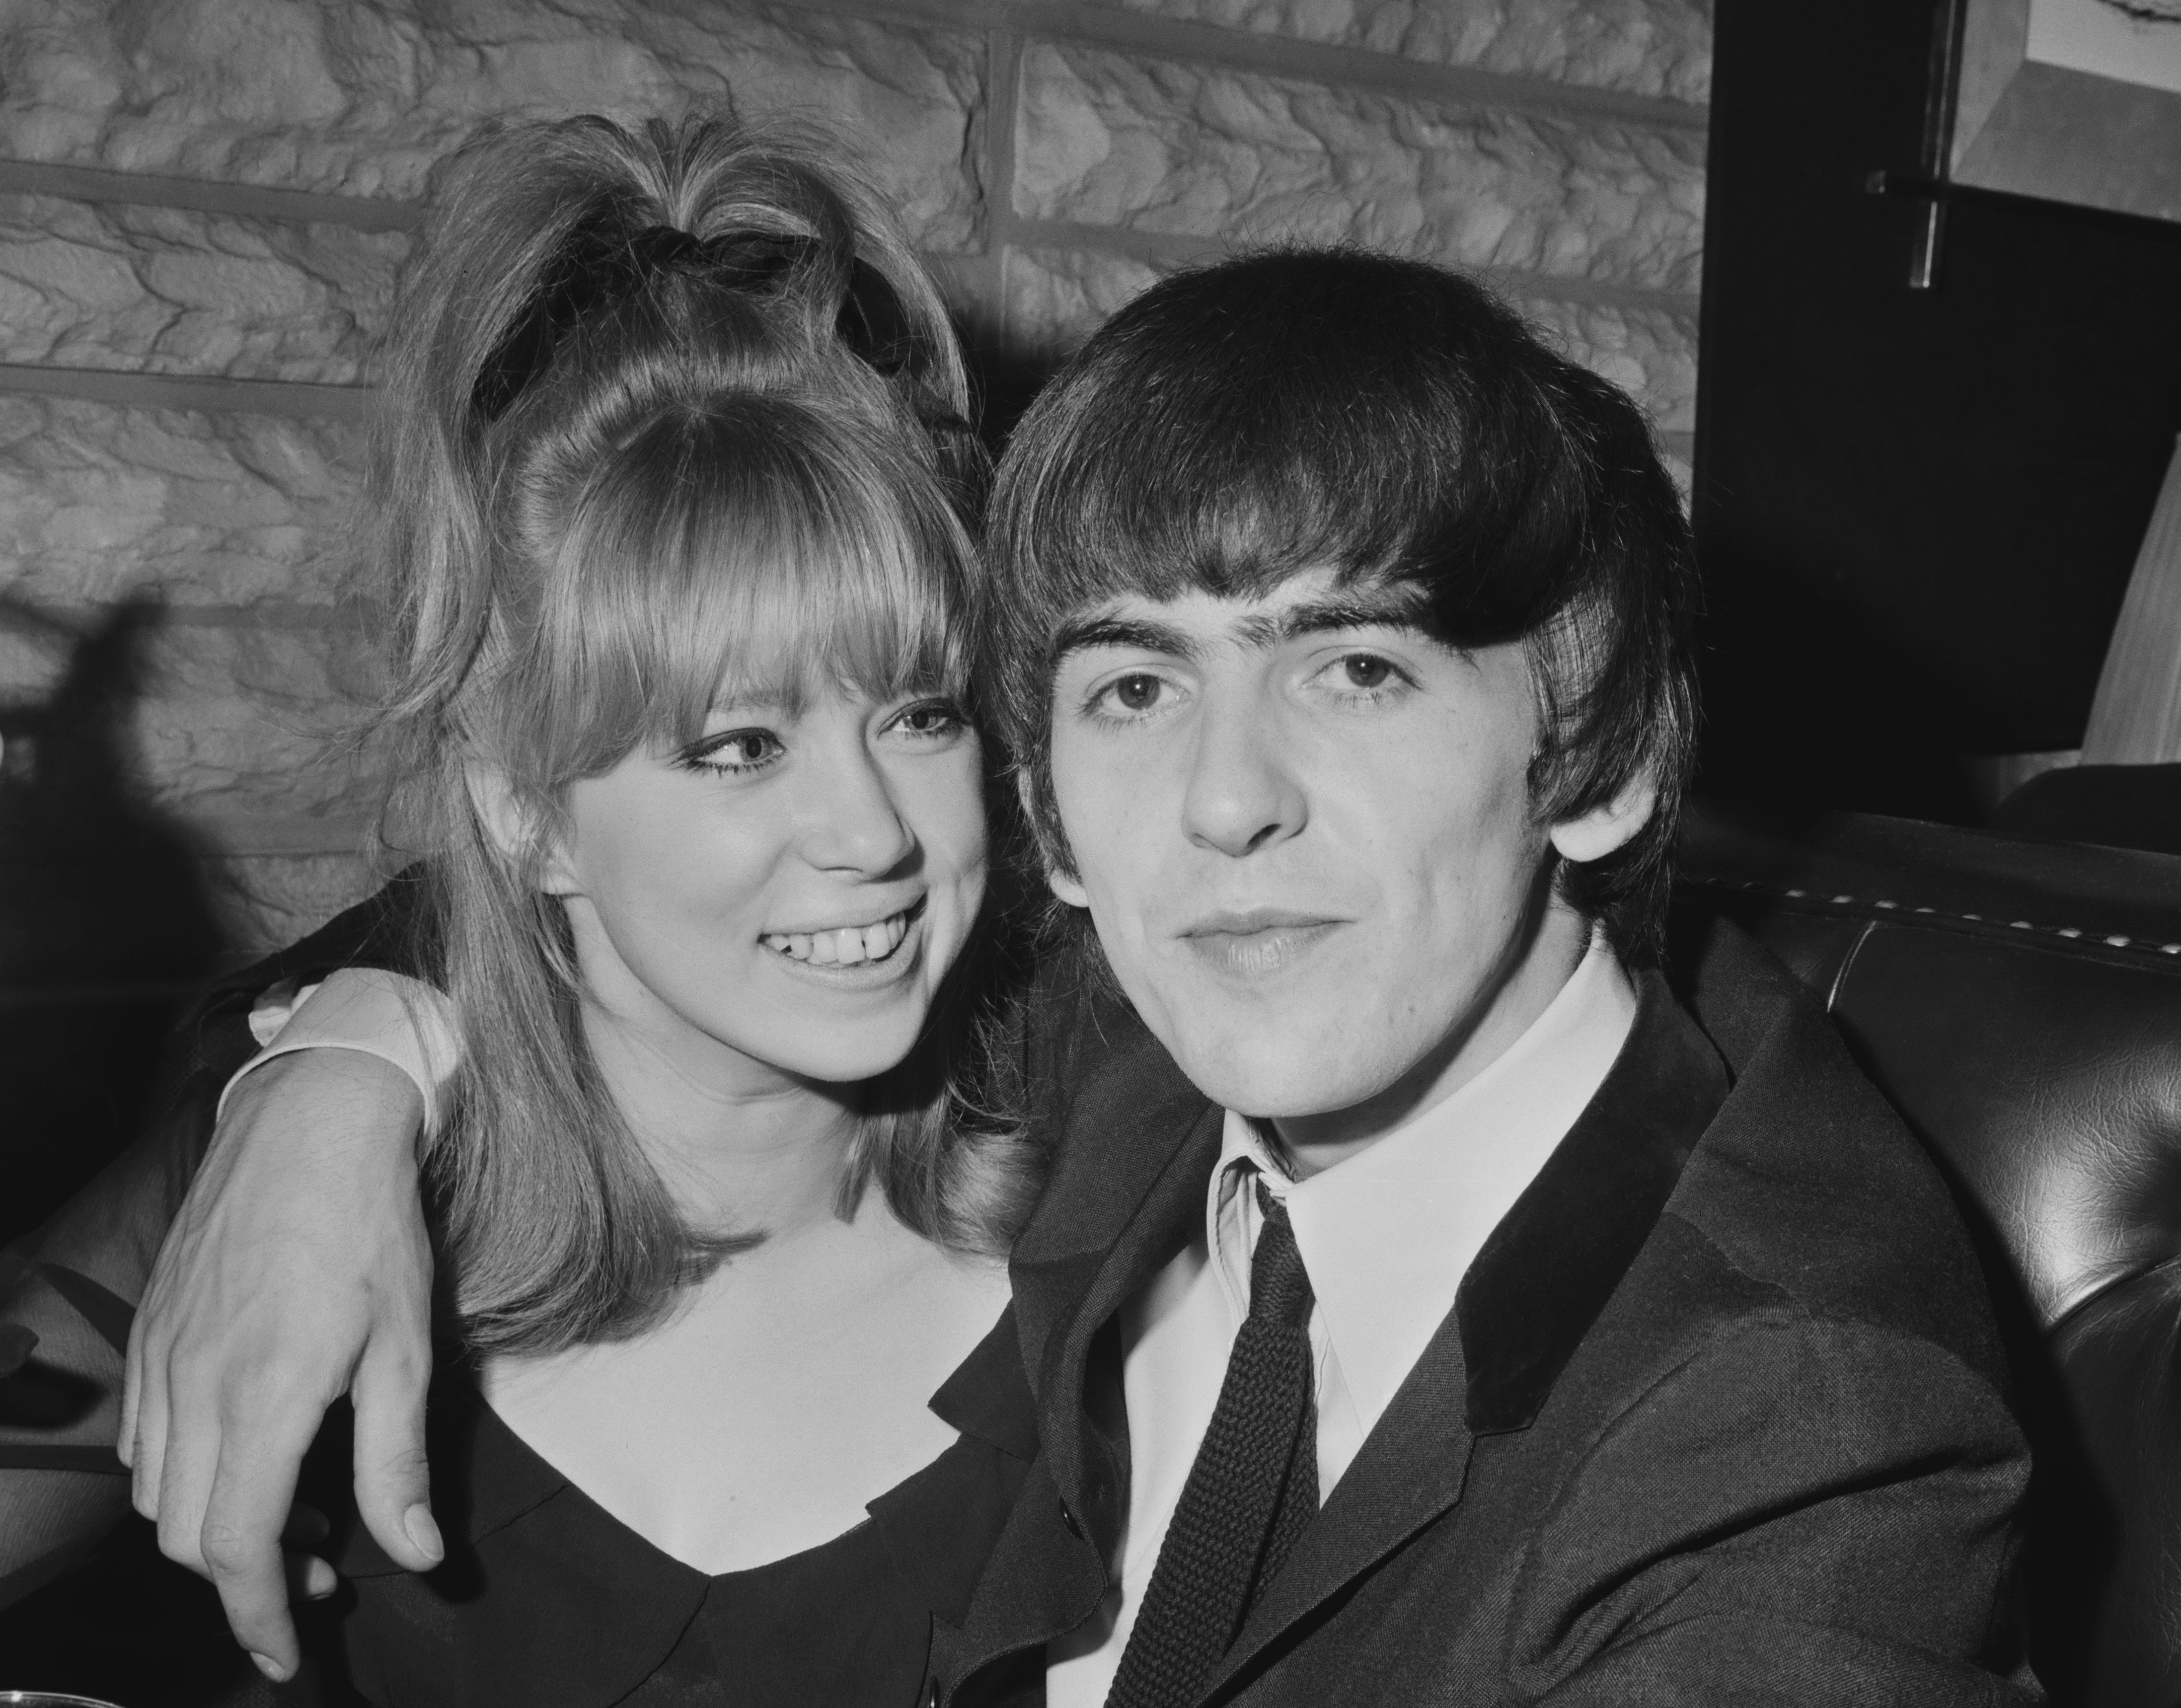 A black and white photo of George Harrison with his arm around Pattie Boyd's shoulder. She stares at him and smiles.